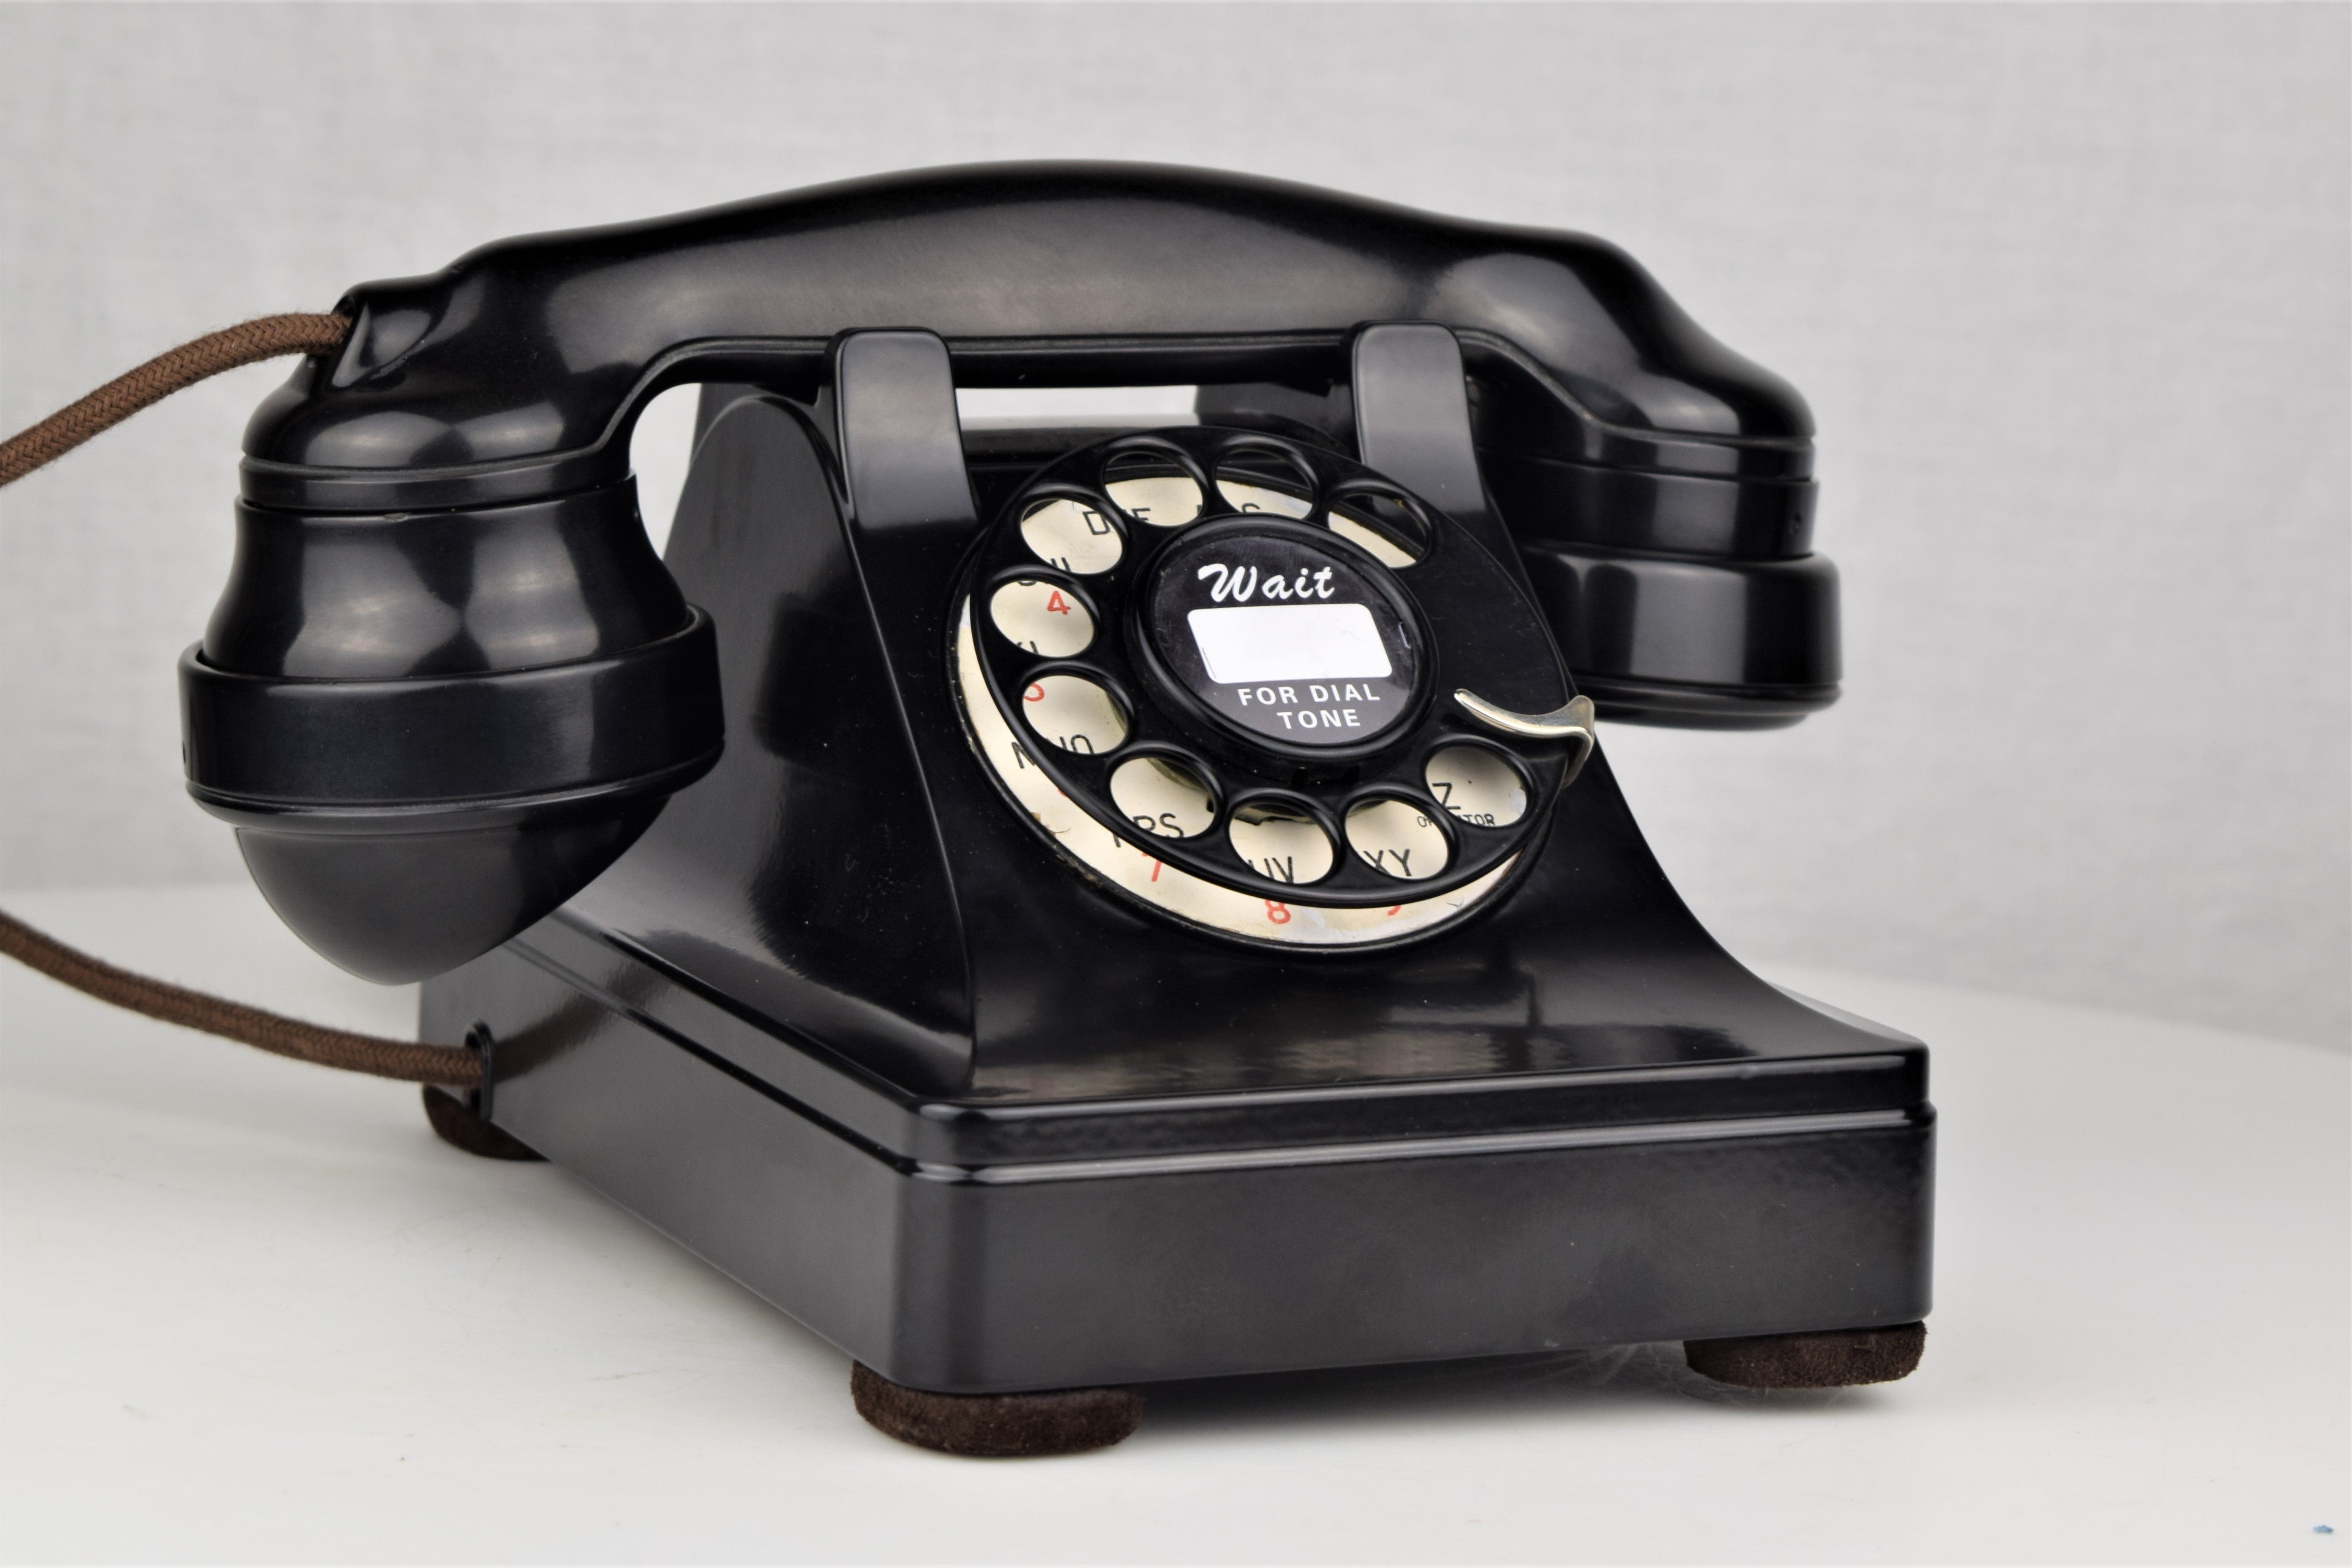 Western Electric 302 - Black - Date matched 1937